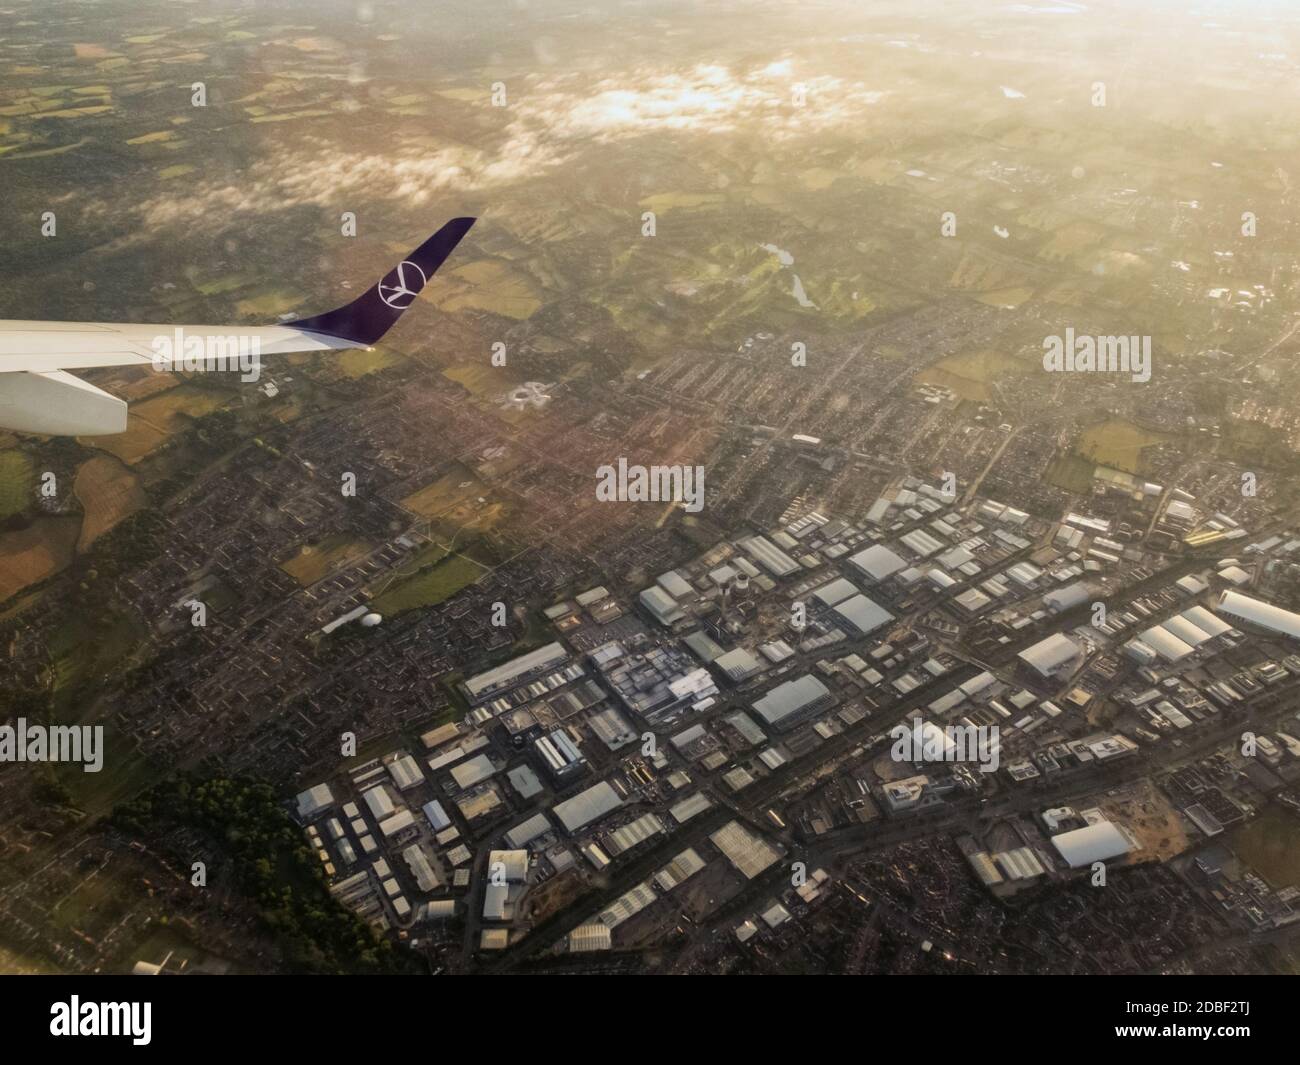 LOT Airlines B737-800 takes off from London Heathrow to Warsaw,Poland as viewed from right hand passenger cabin window on a morning flight. Stock Photo